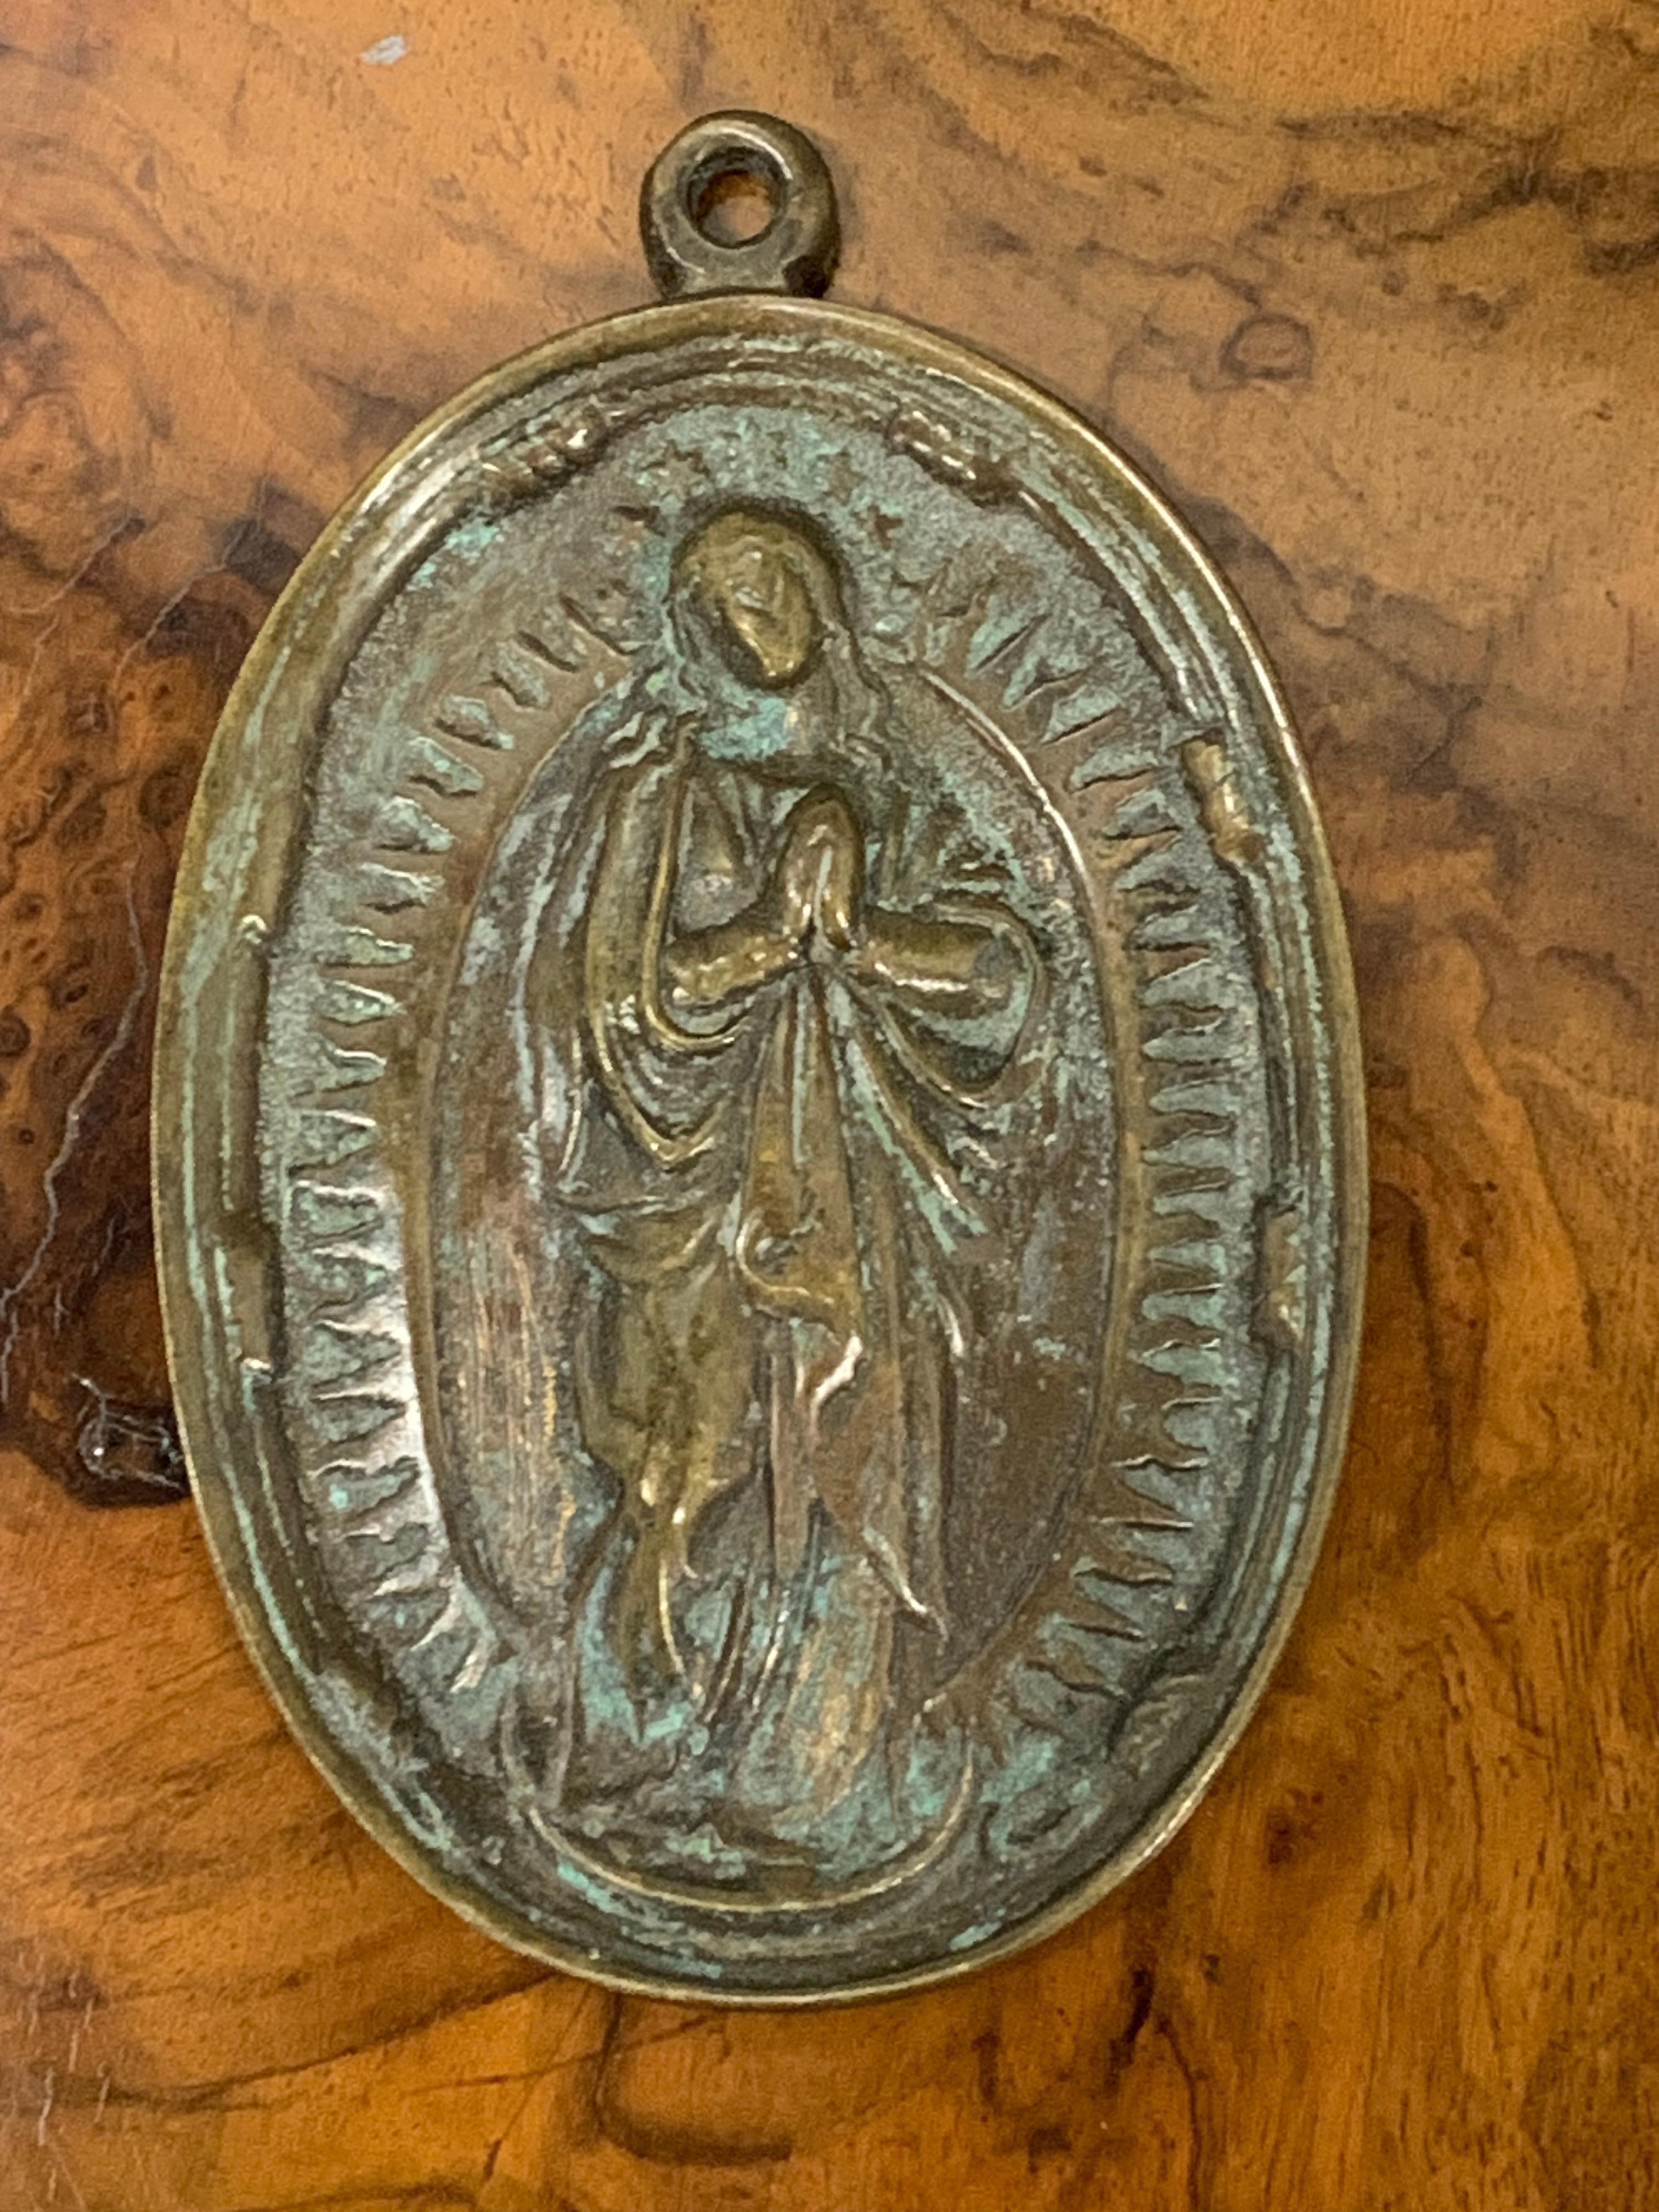 Devotional plaque, Immaculate Conception. Bronze. Spanish school, 17th century. 
Bronze devotional plate with washer at the top that presents a relief on the front. In this you can see the Virgin Mary on a crescent moon, surrounded by light and